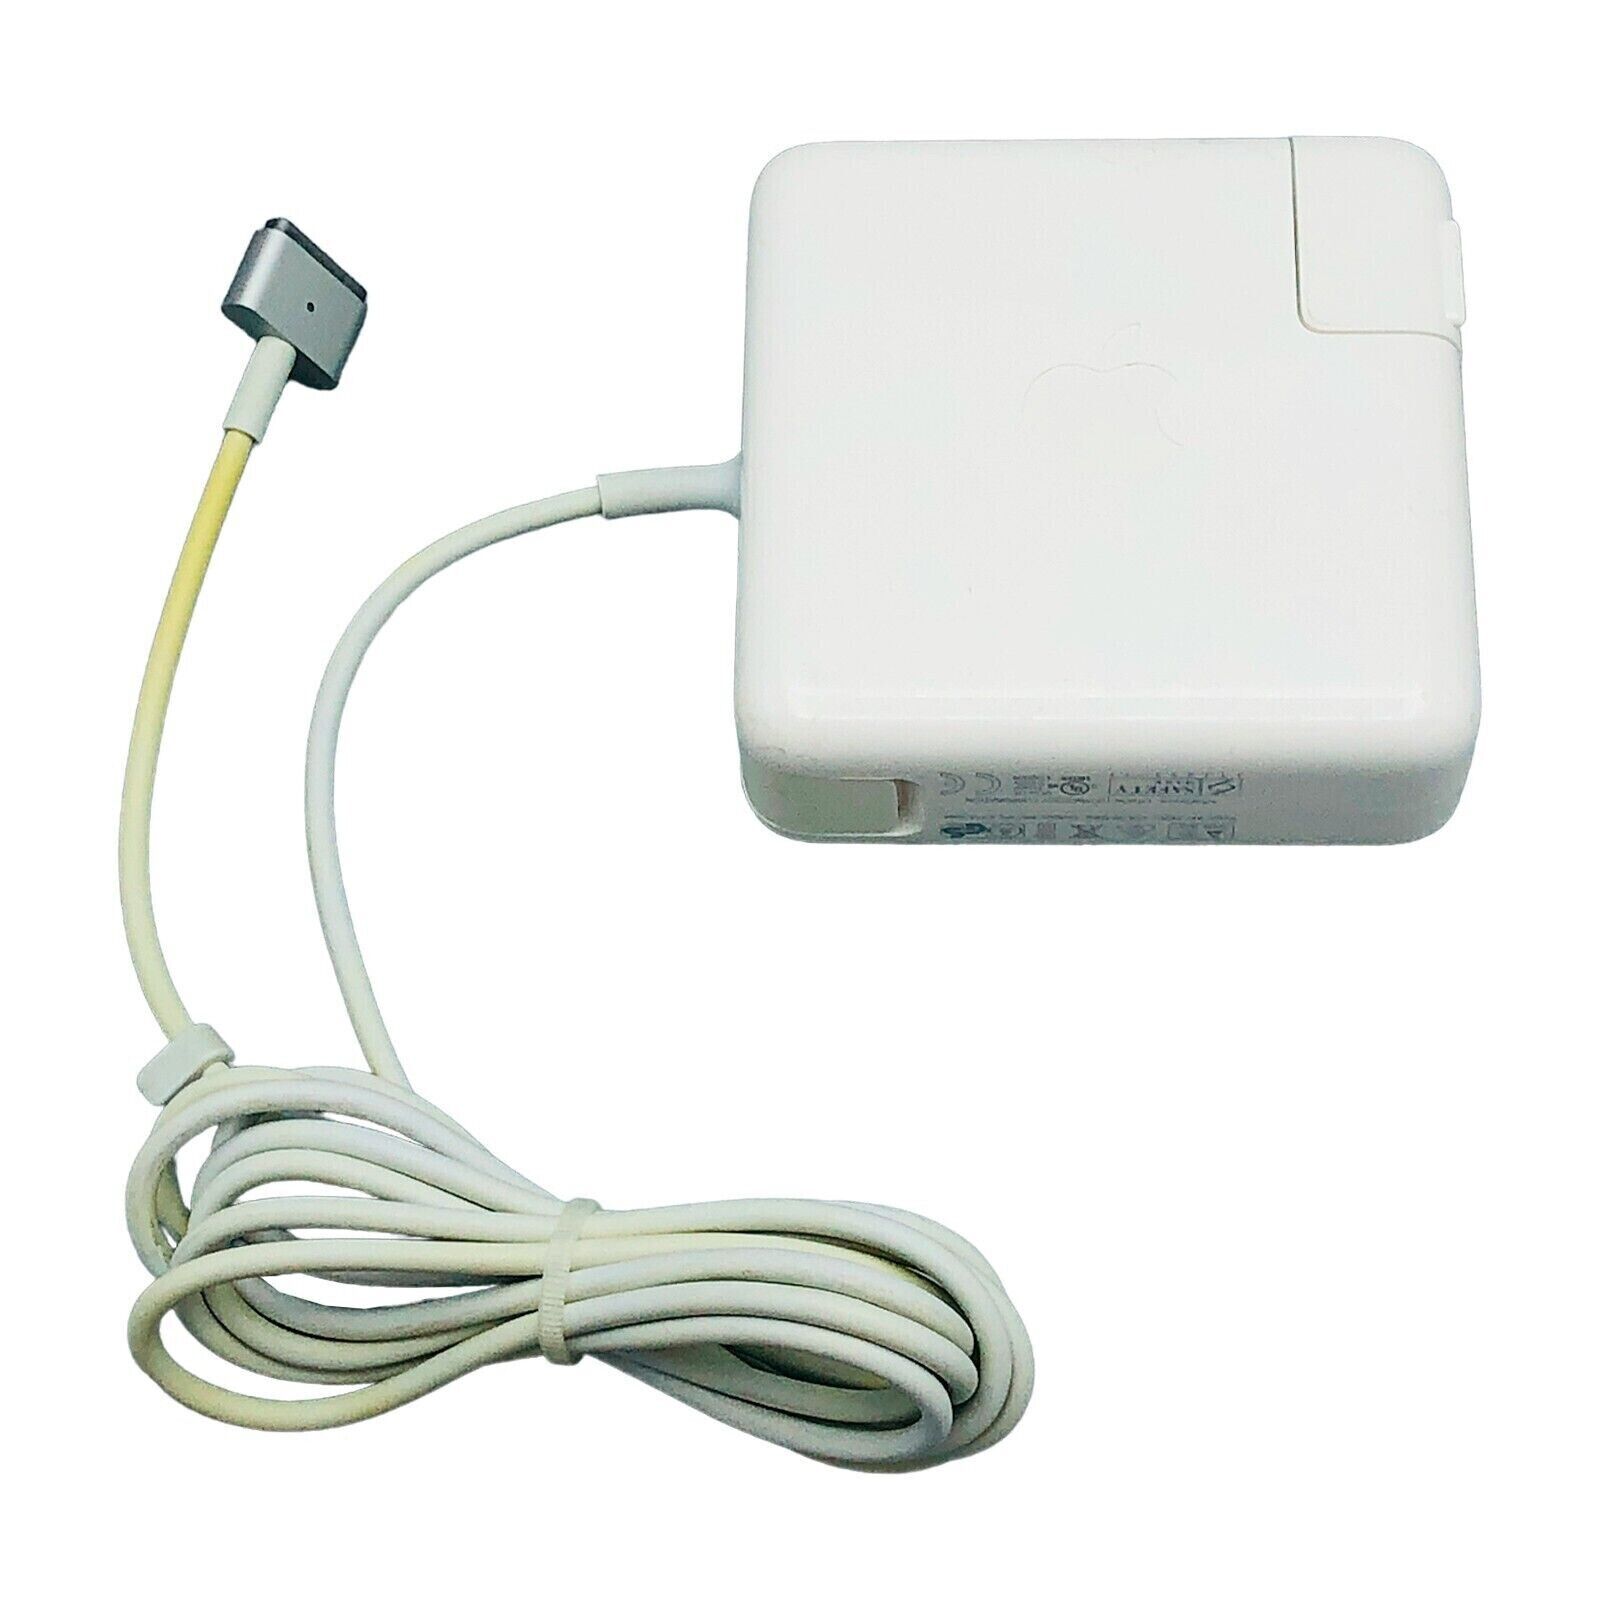 FAIR Apple (45W) MagSafe 2 Power Adapter with Folding Wall Plug - White (A1436)